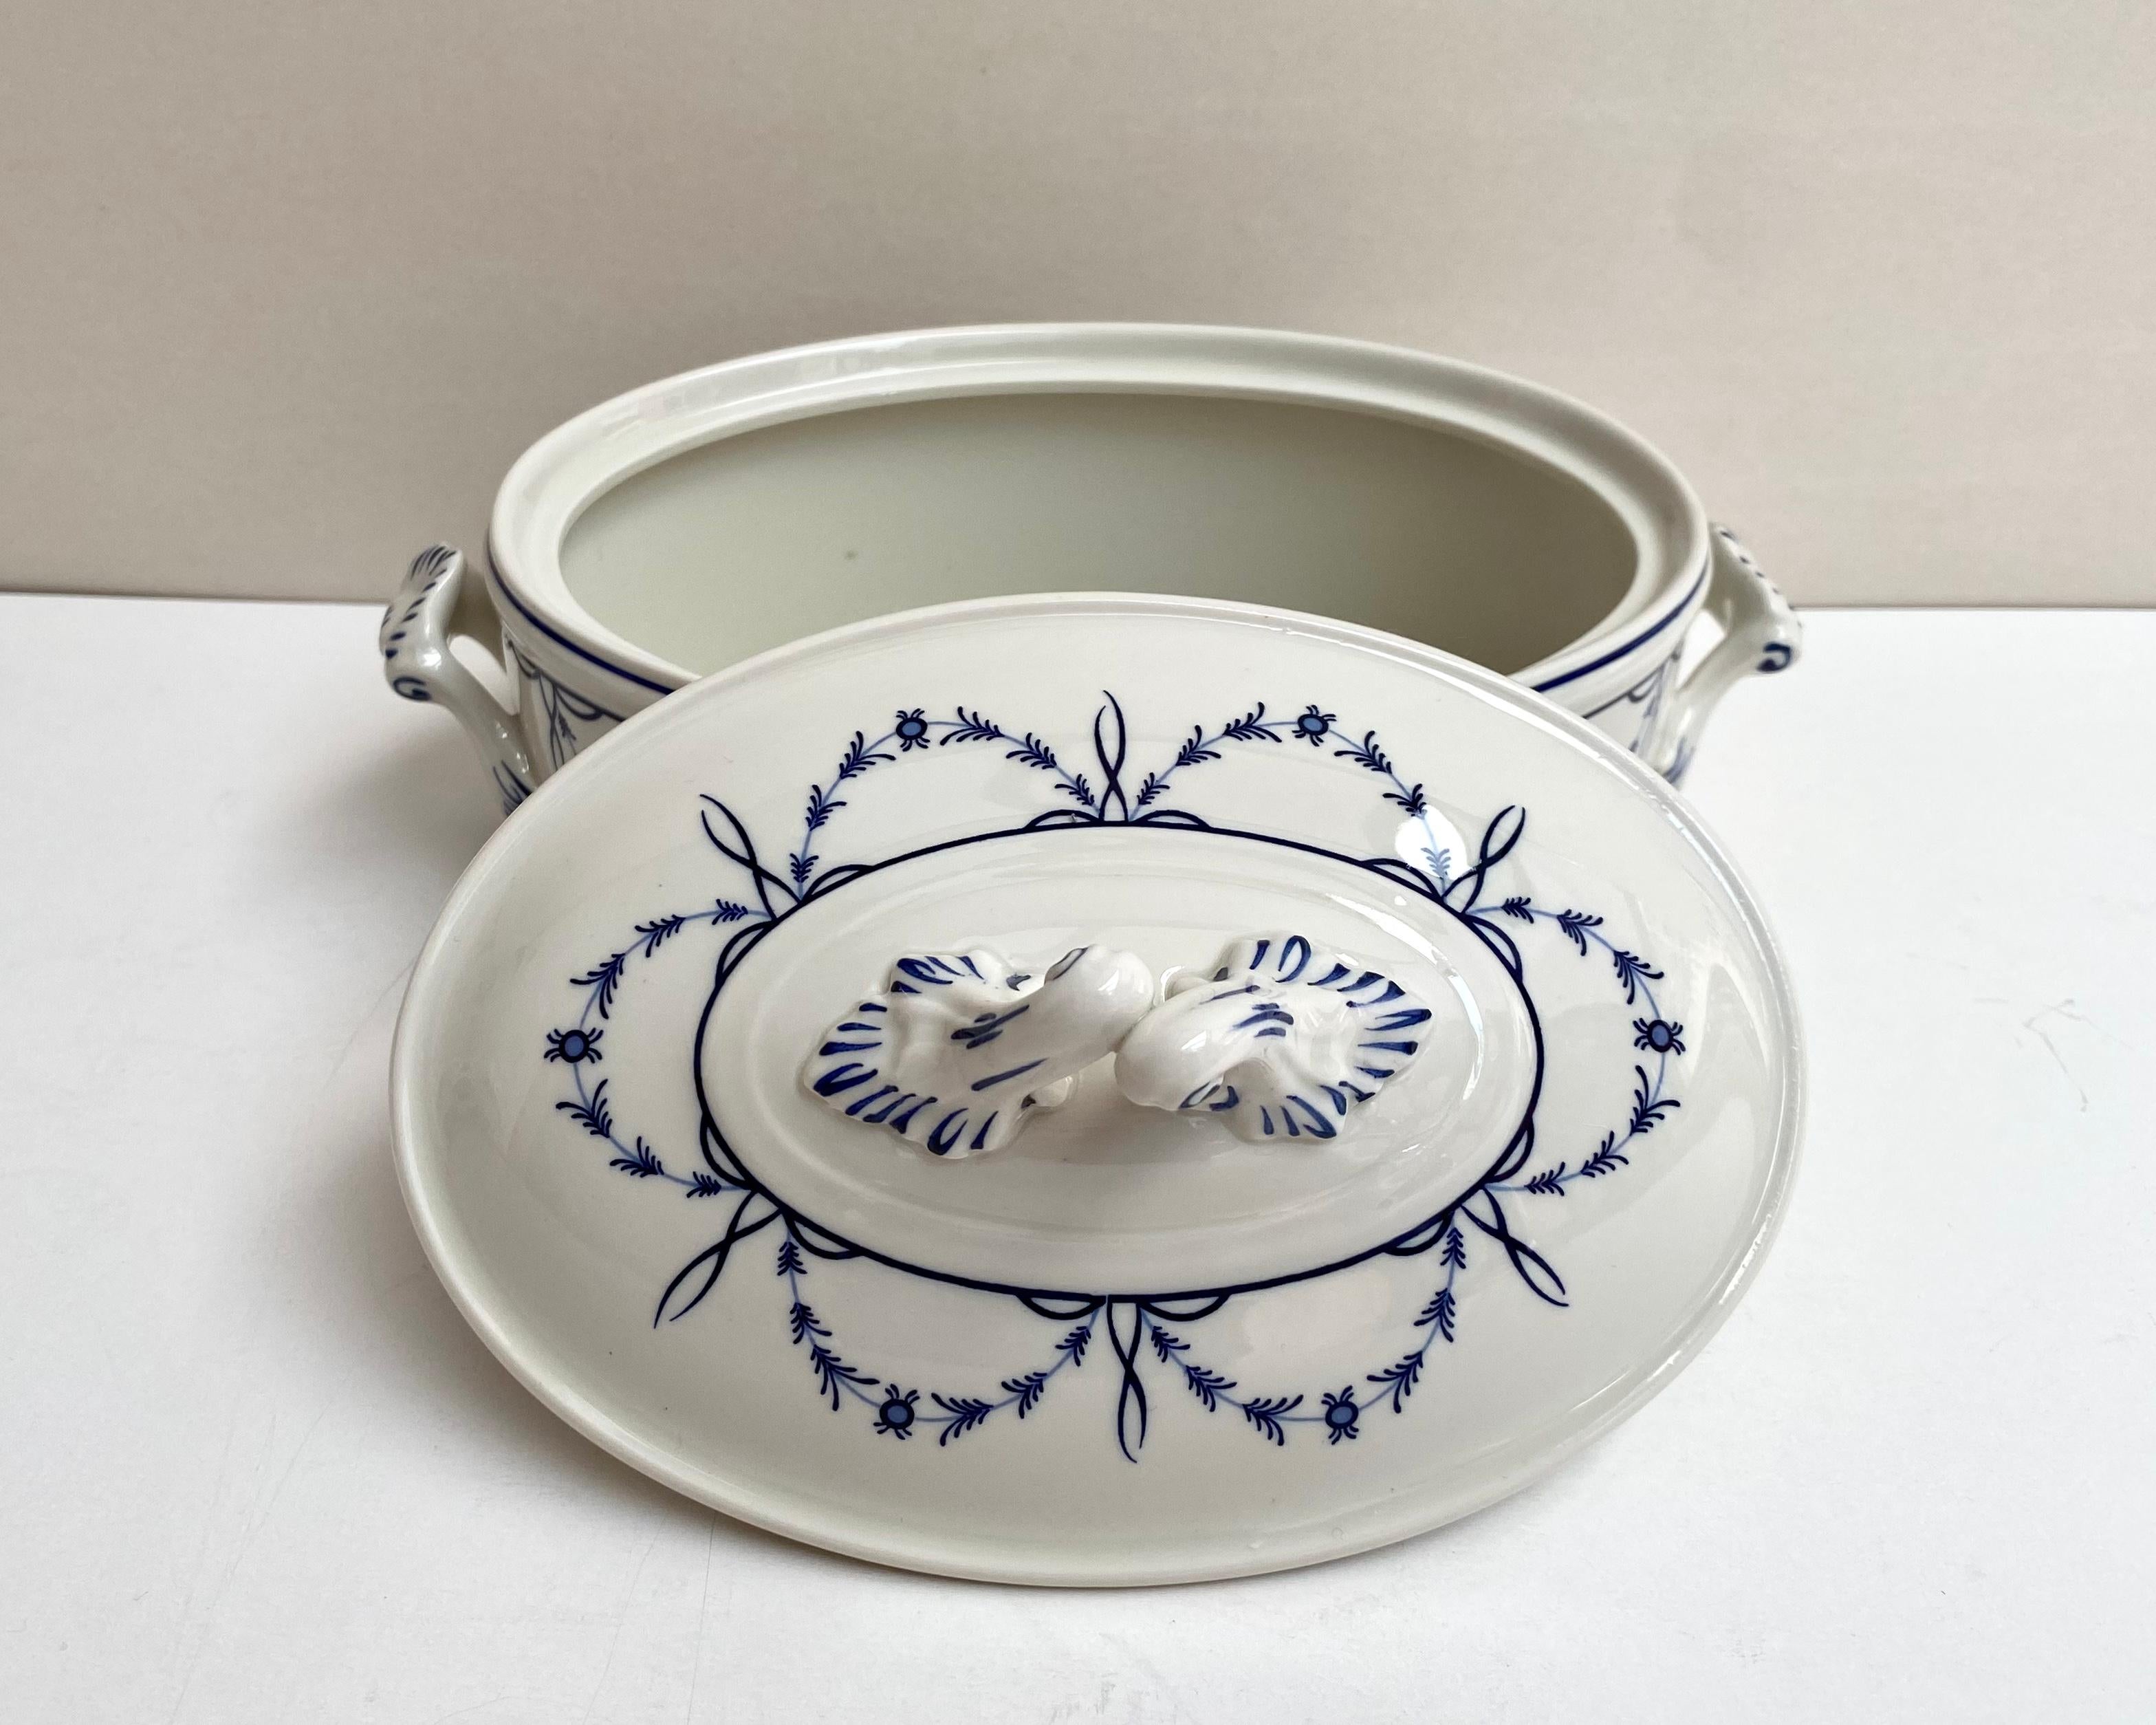 A stunning 20th century Vieux Septfontaines by Villeroy & Boch porcelain tureen or candy jar in wonderful condition. 

Its incredible blue hand painted detail of dripping garlands tied in bows will have you and your guests utterly